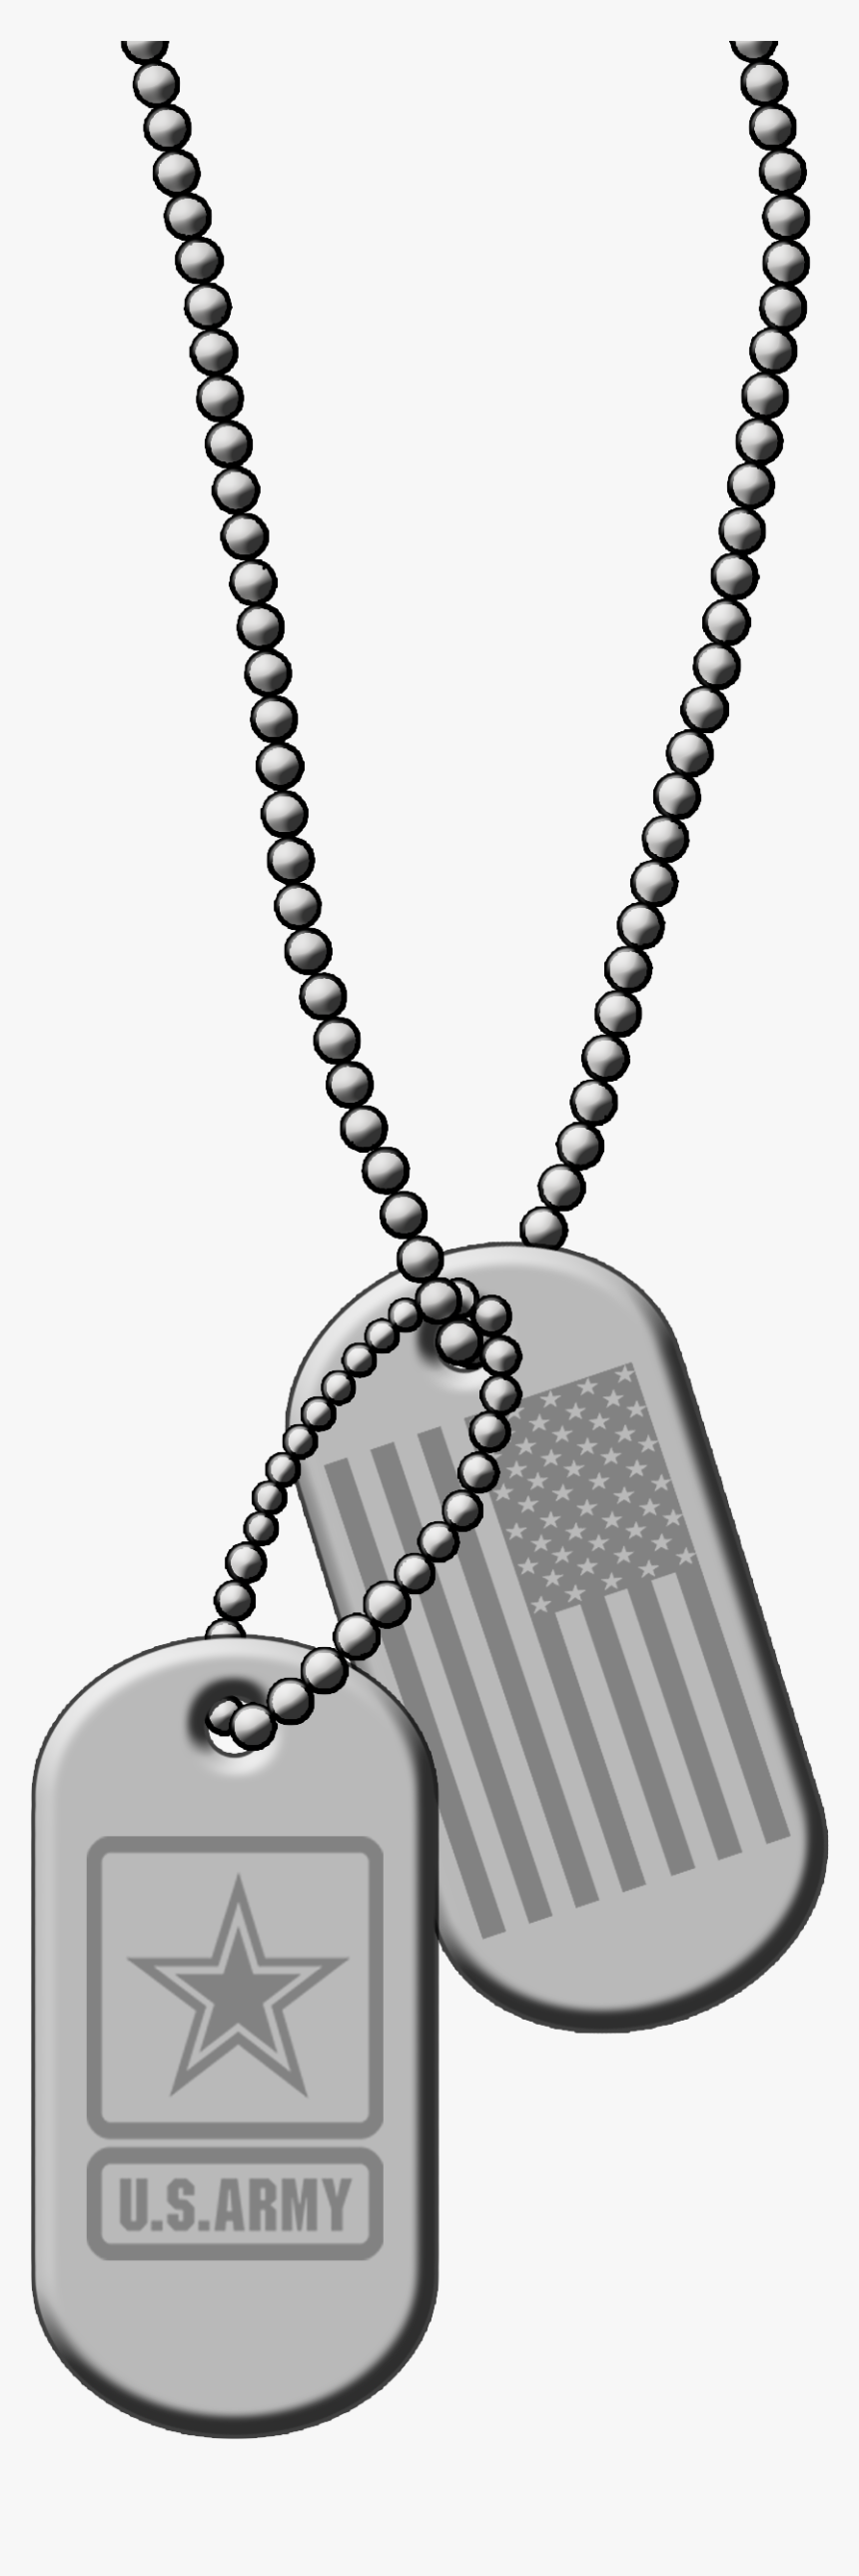 Dog Tag United States Military Army Soldier - Army Dog Tags Png, Transparent Png, Free Download